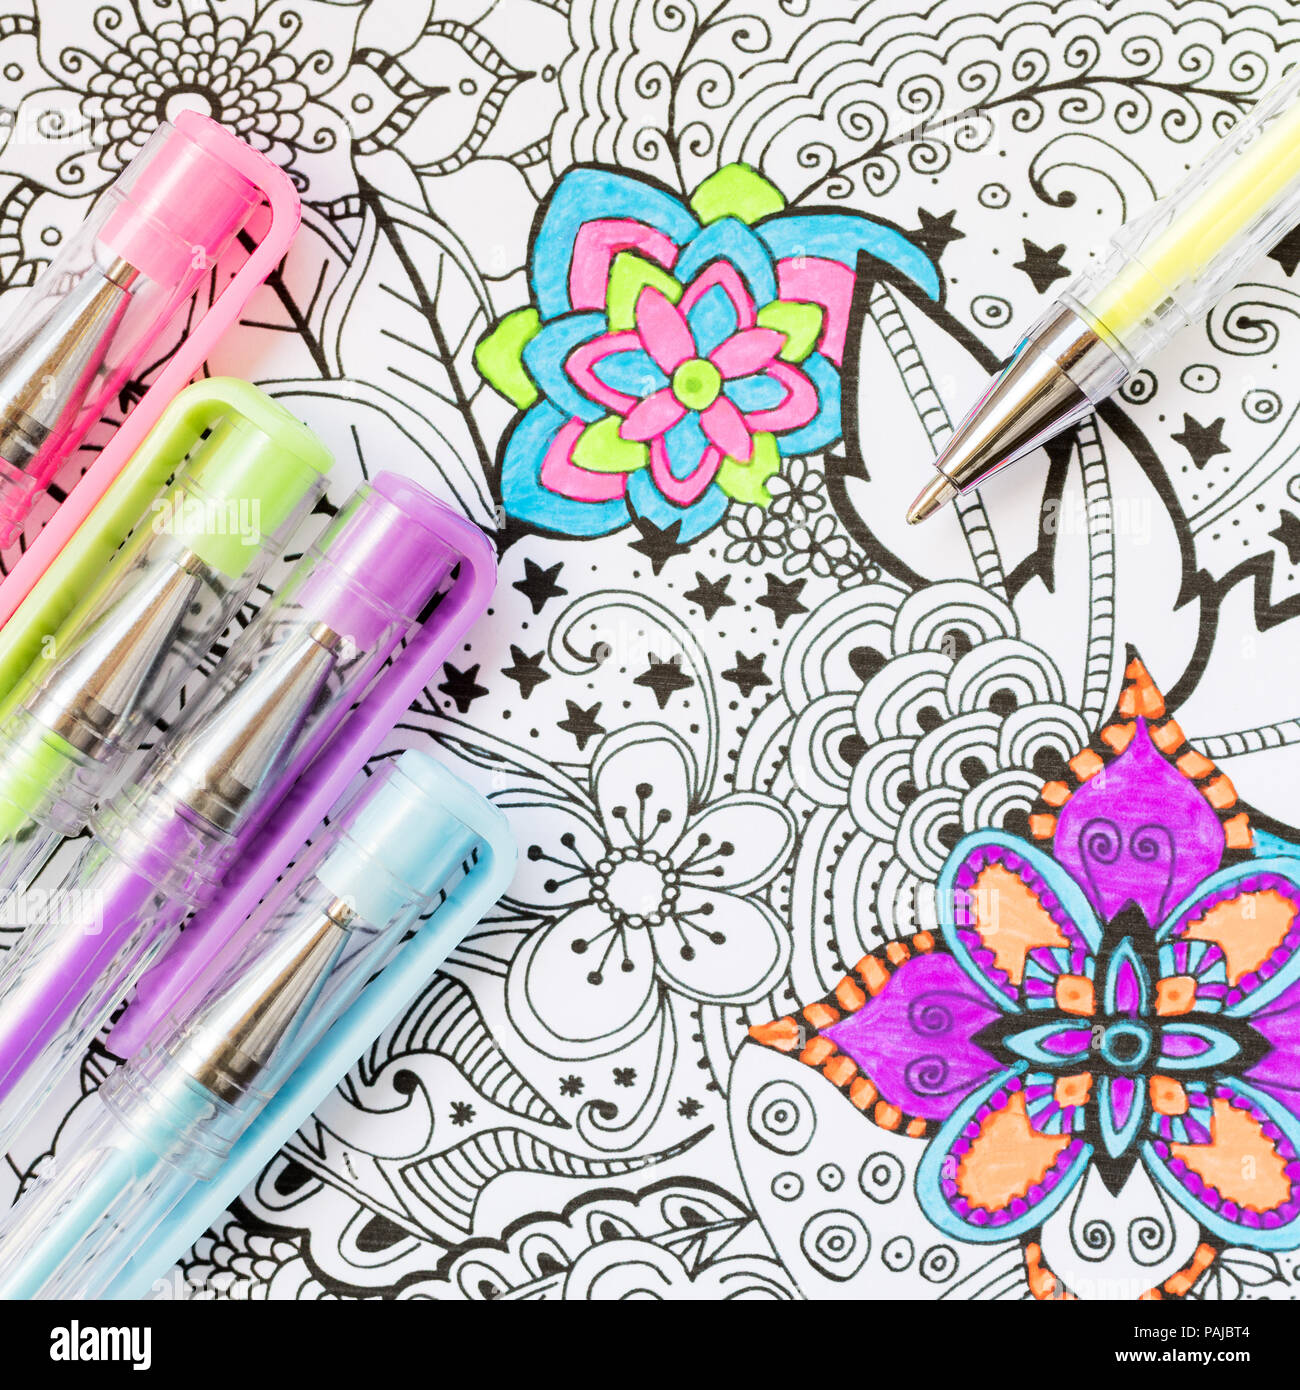 Is There a Place For Coloring Books in Art Therapy? - Creativity in Therapy